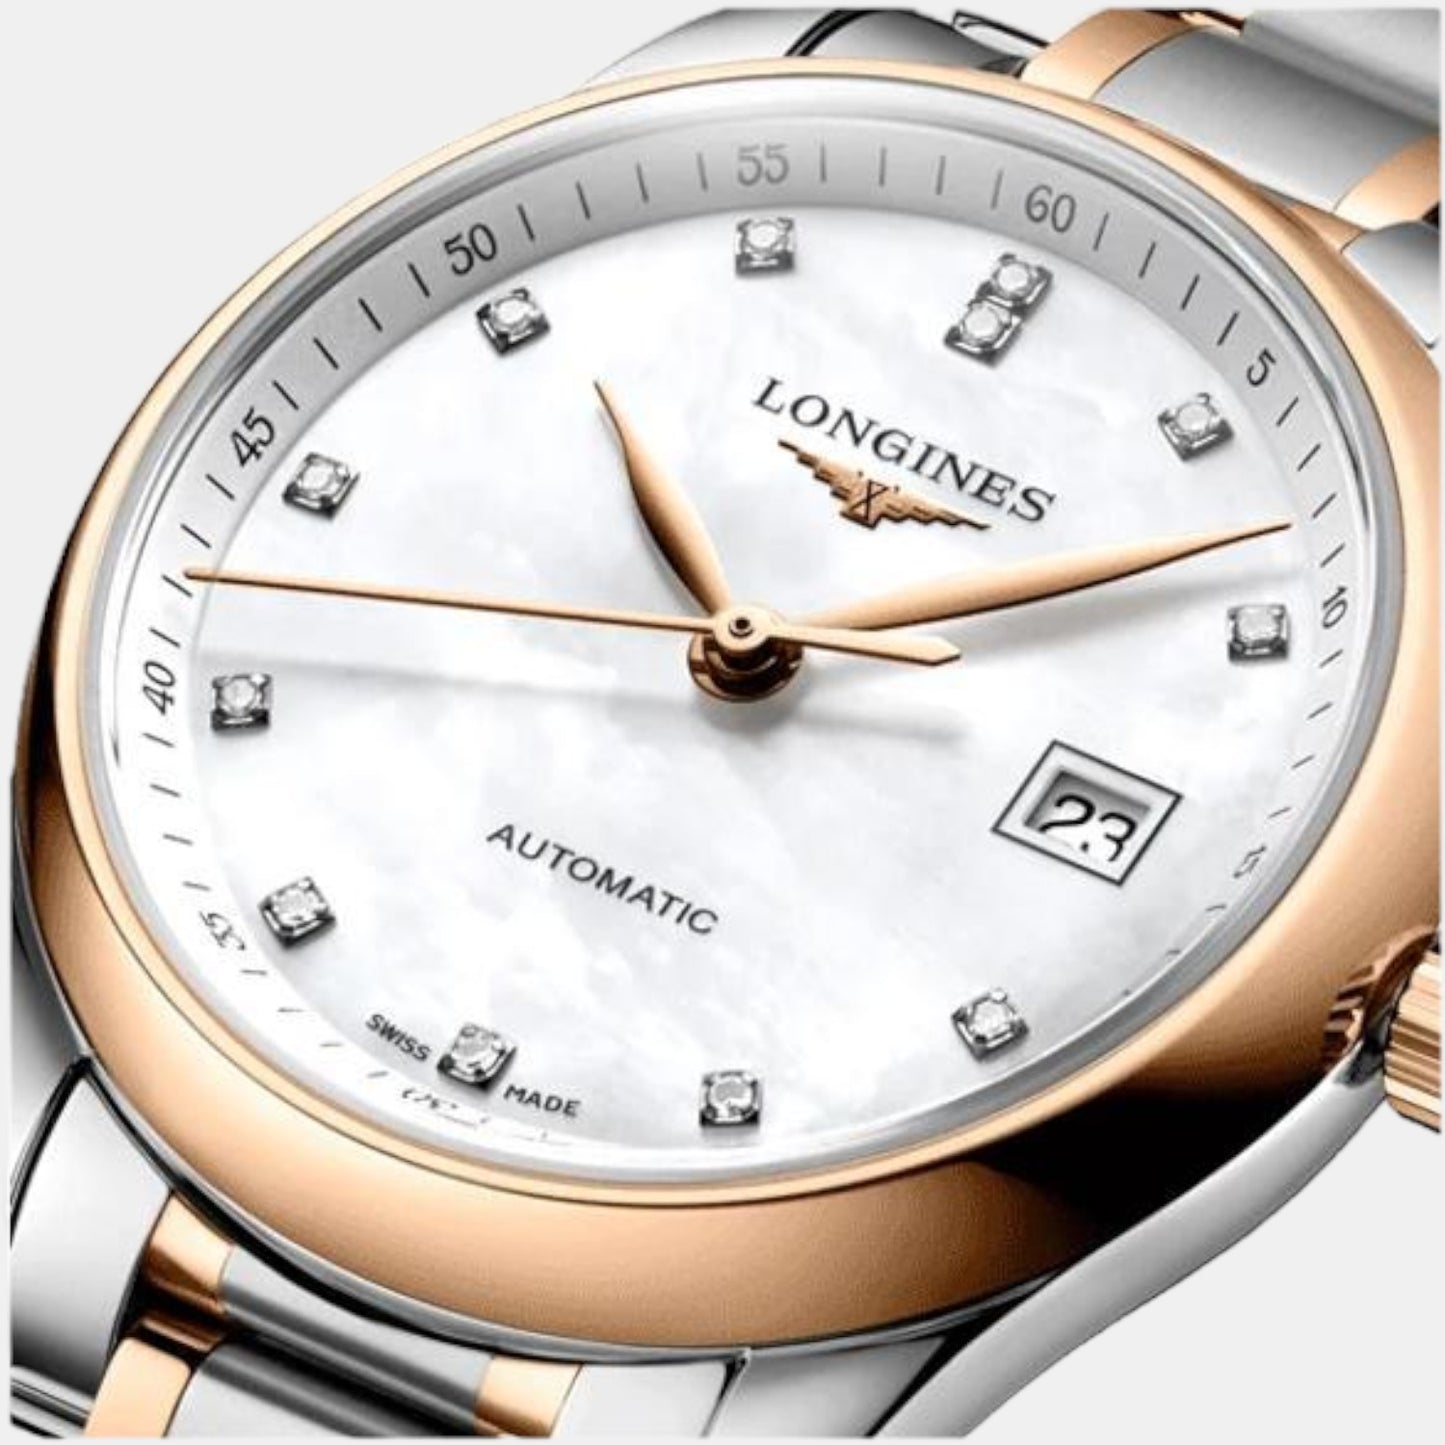 The Longines Master Female Analog Stainless Steel Watch L22575897